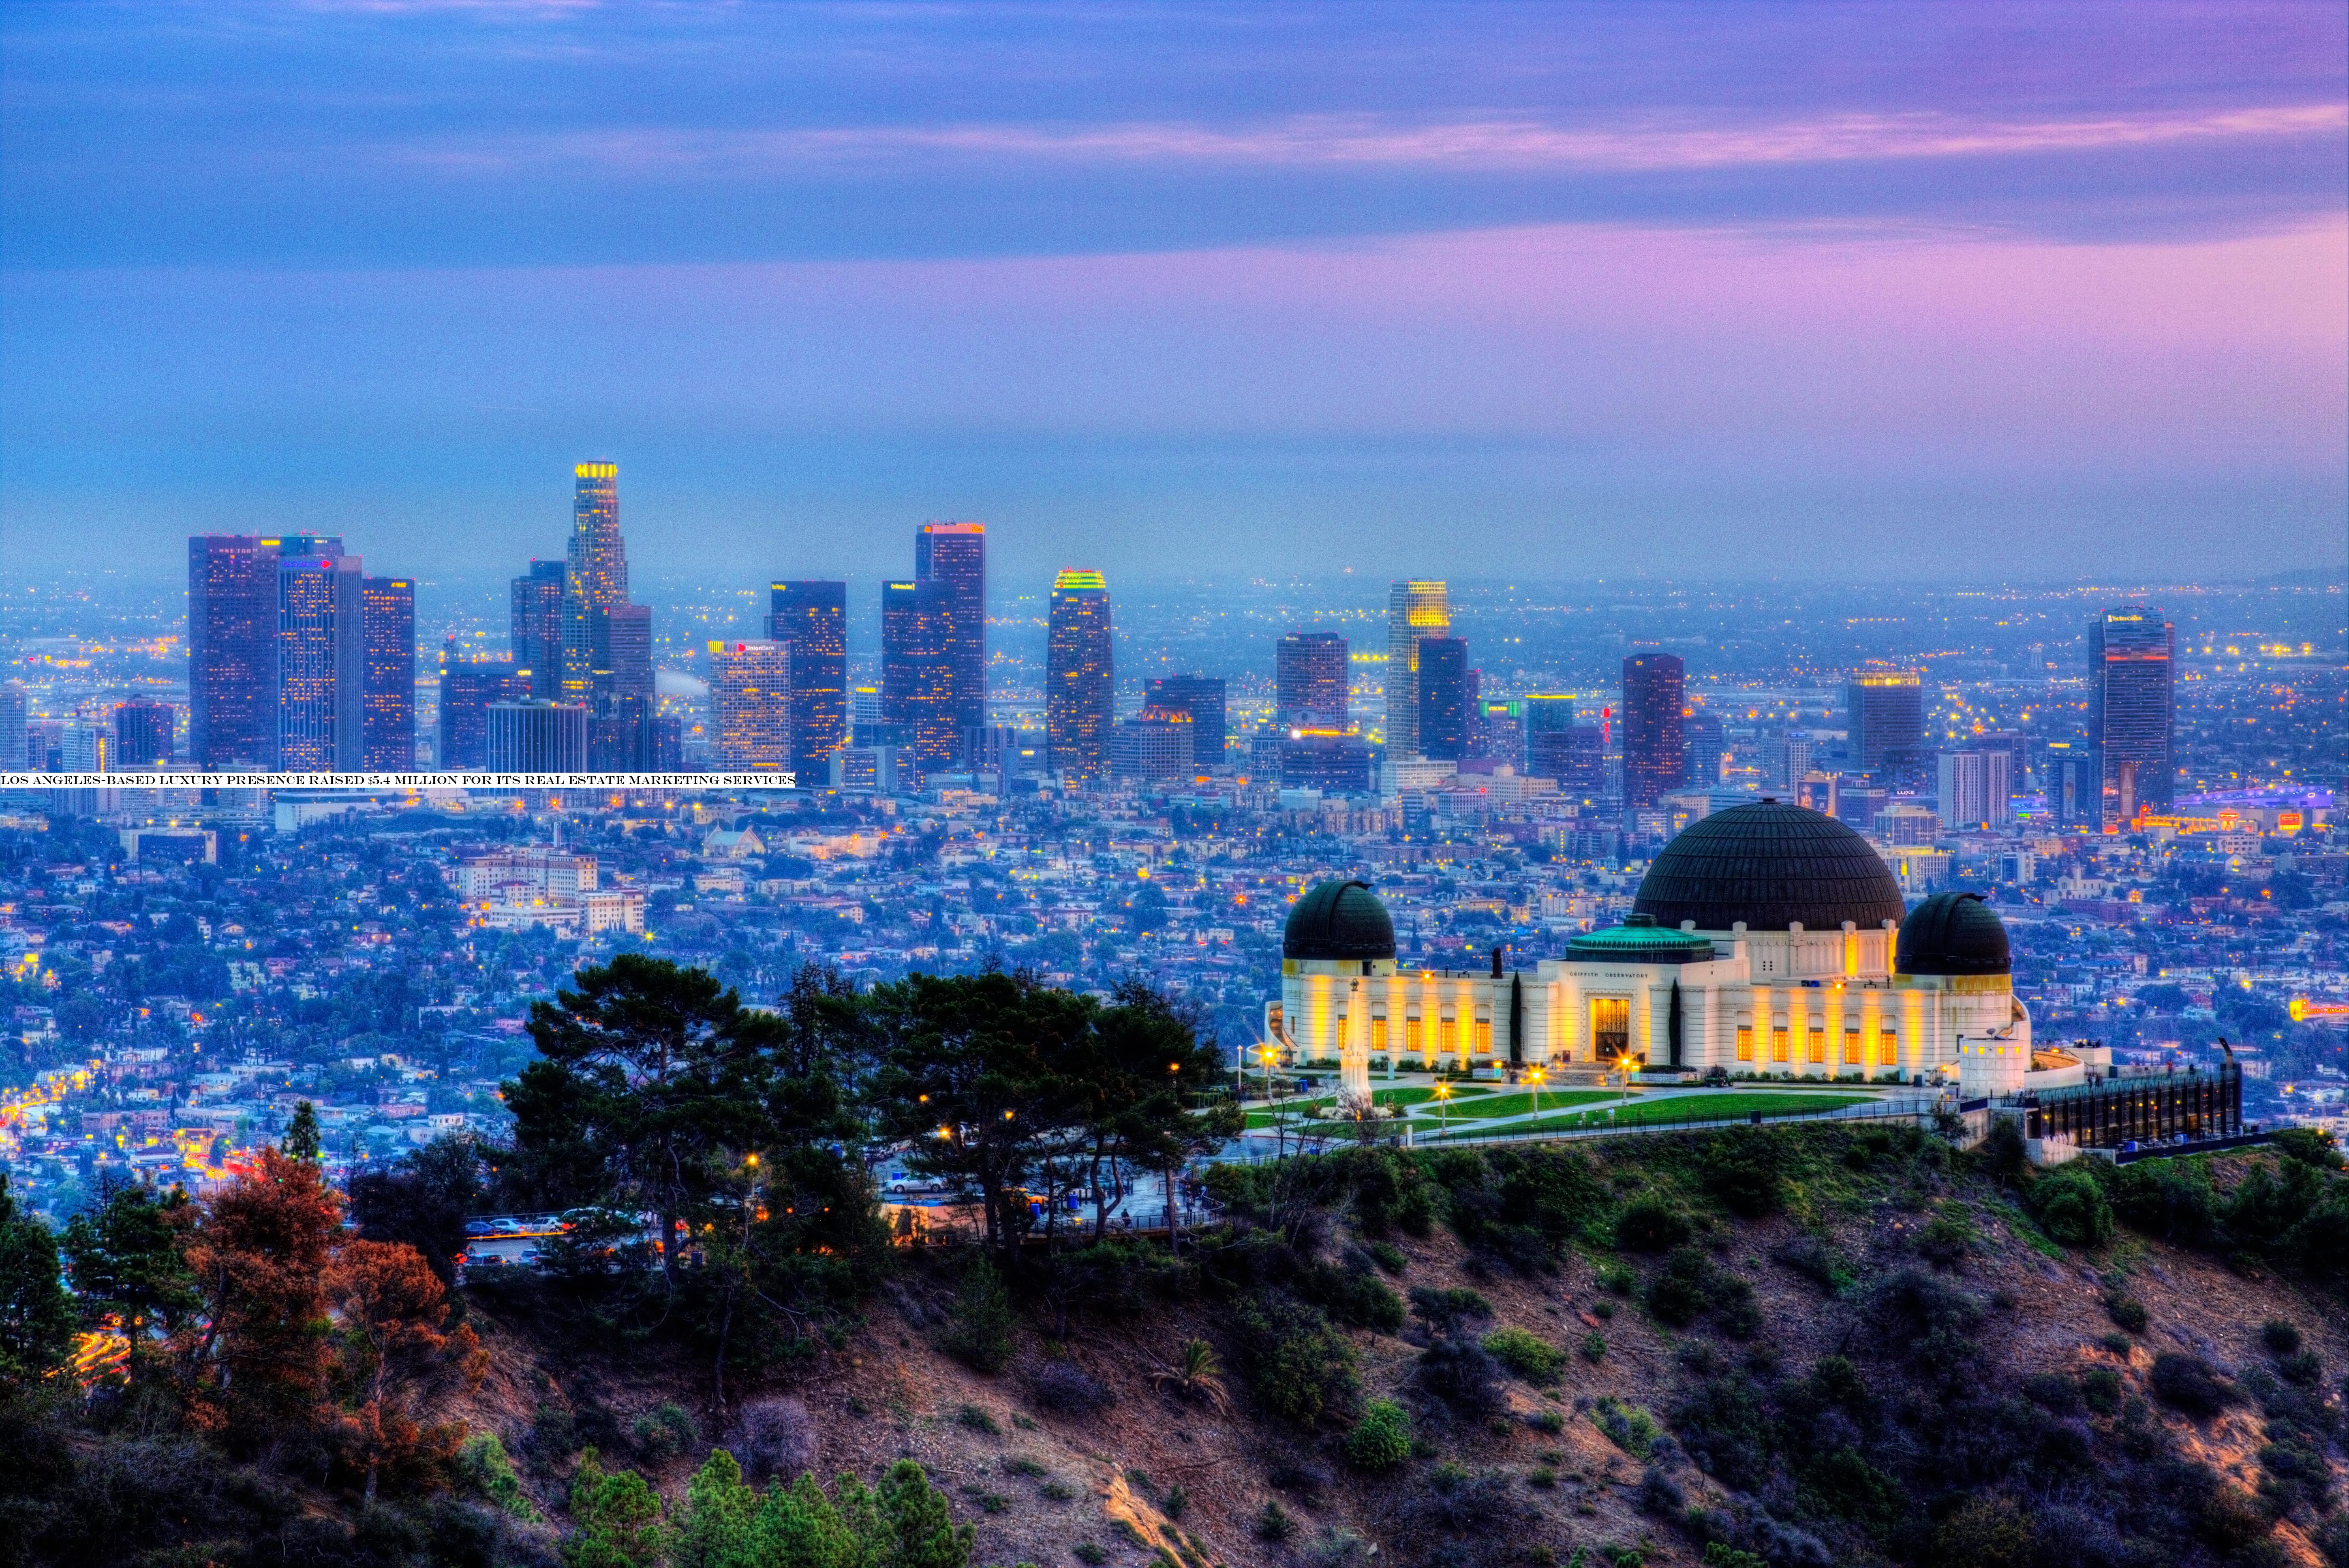 Los Angeles-based Luxury Presence raised $5.4 million for its real estate marketing services